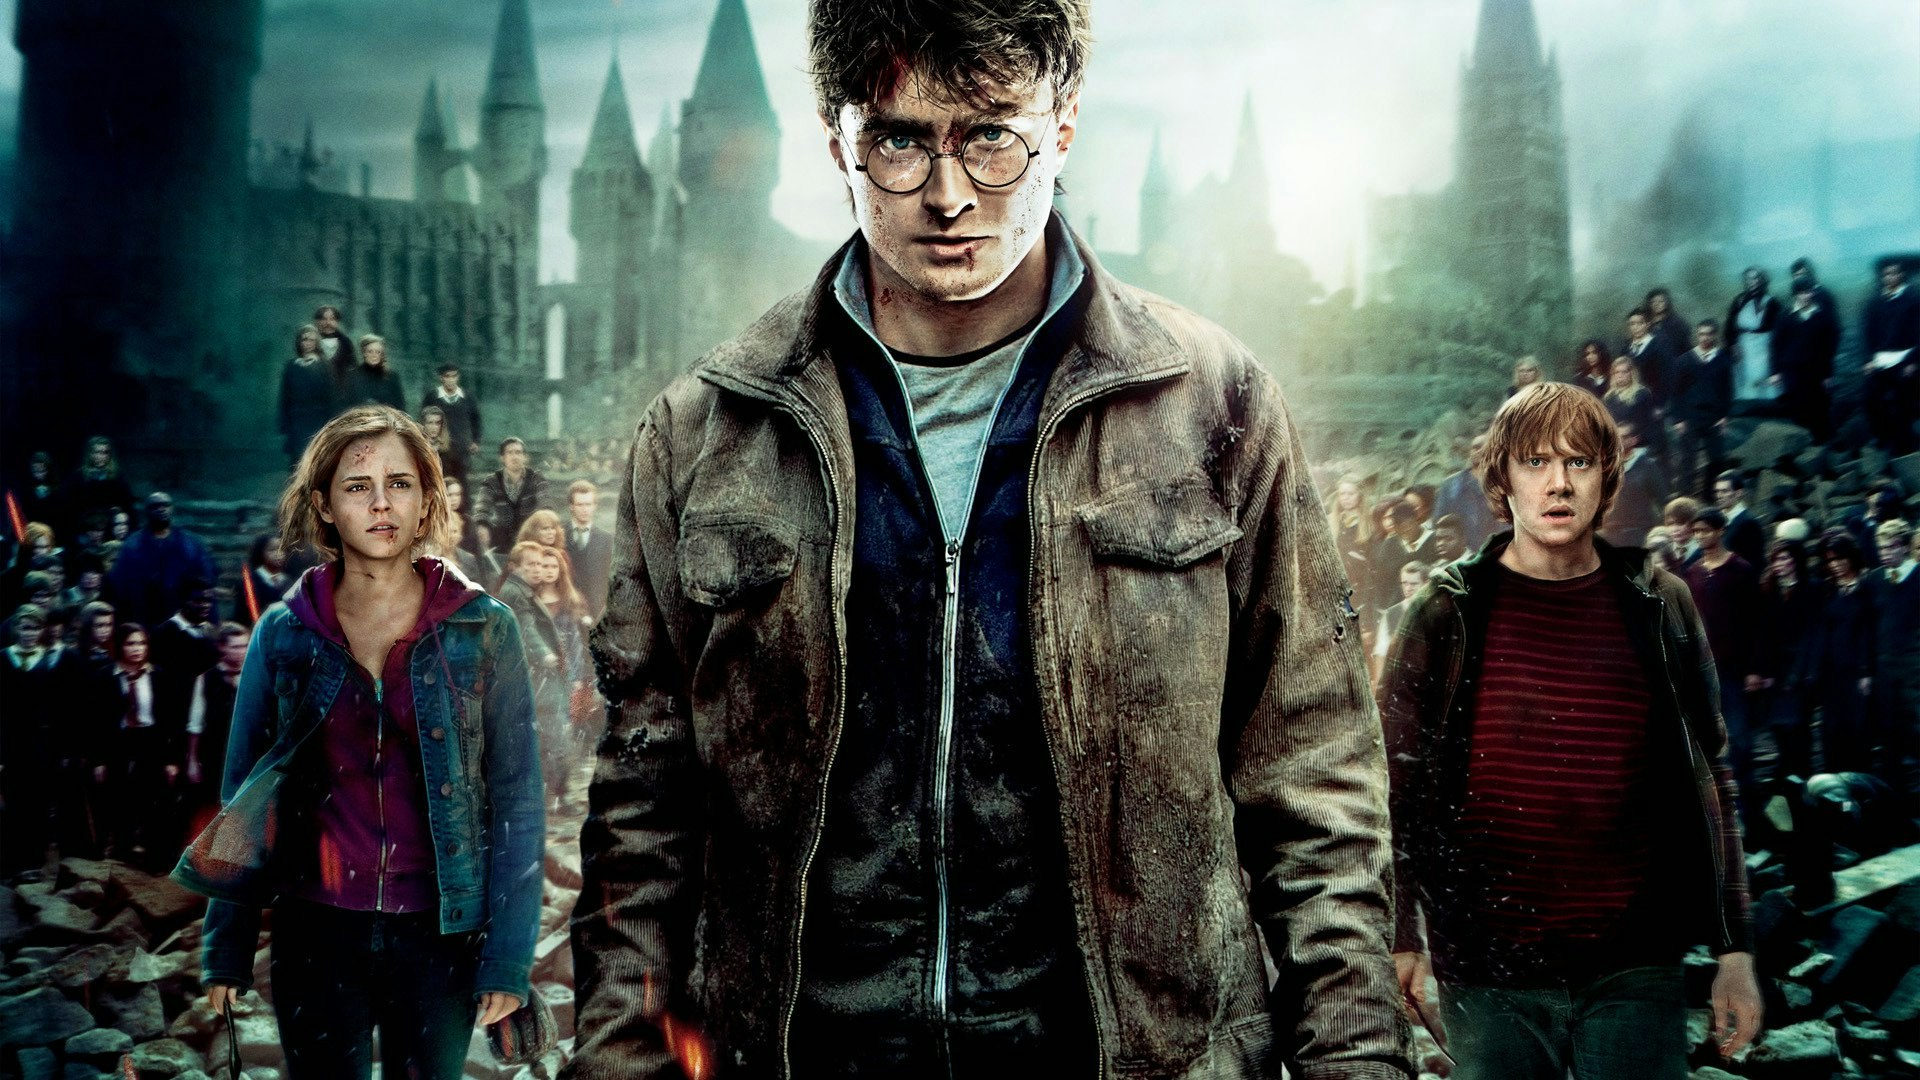 Harry Potter And The Deathly Hallows, Teaser Trailer